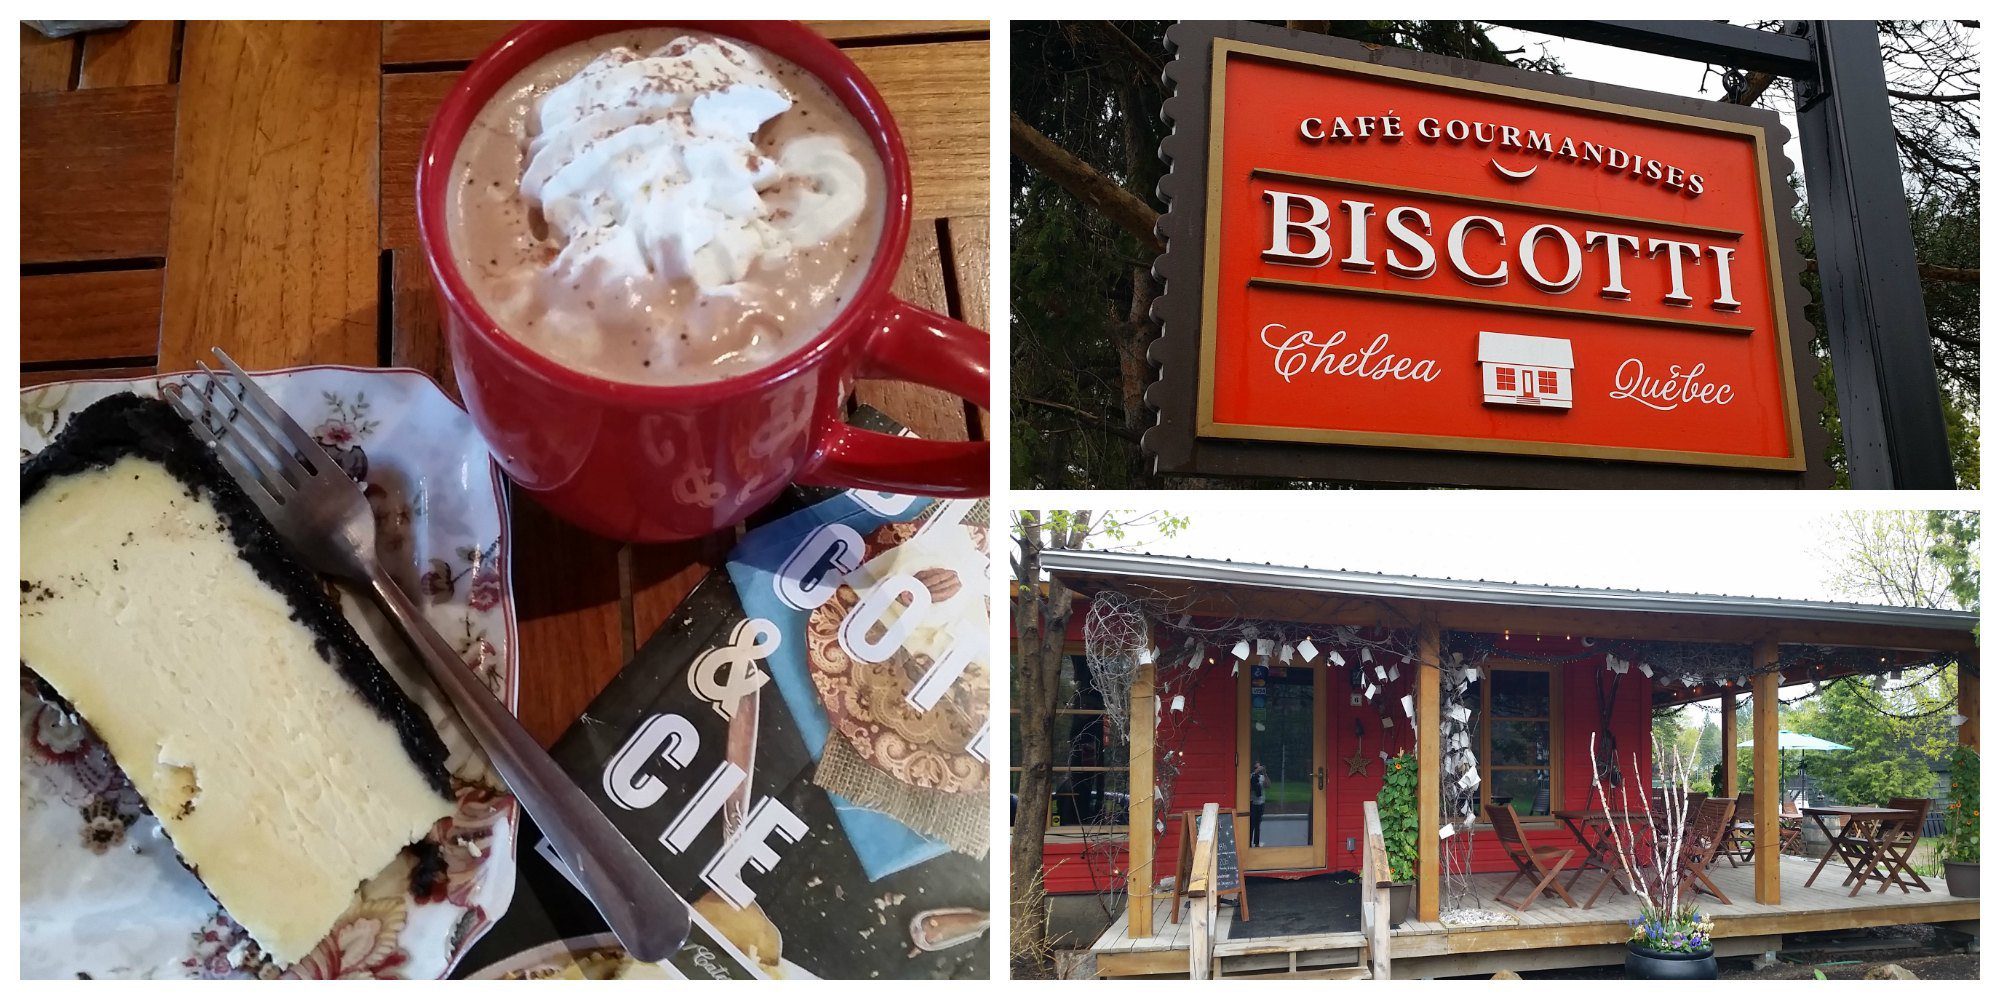 Biscotti Cafe Delights in Chelsea, Canada